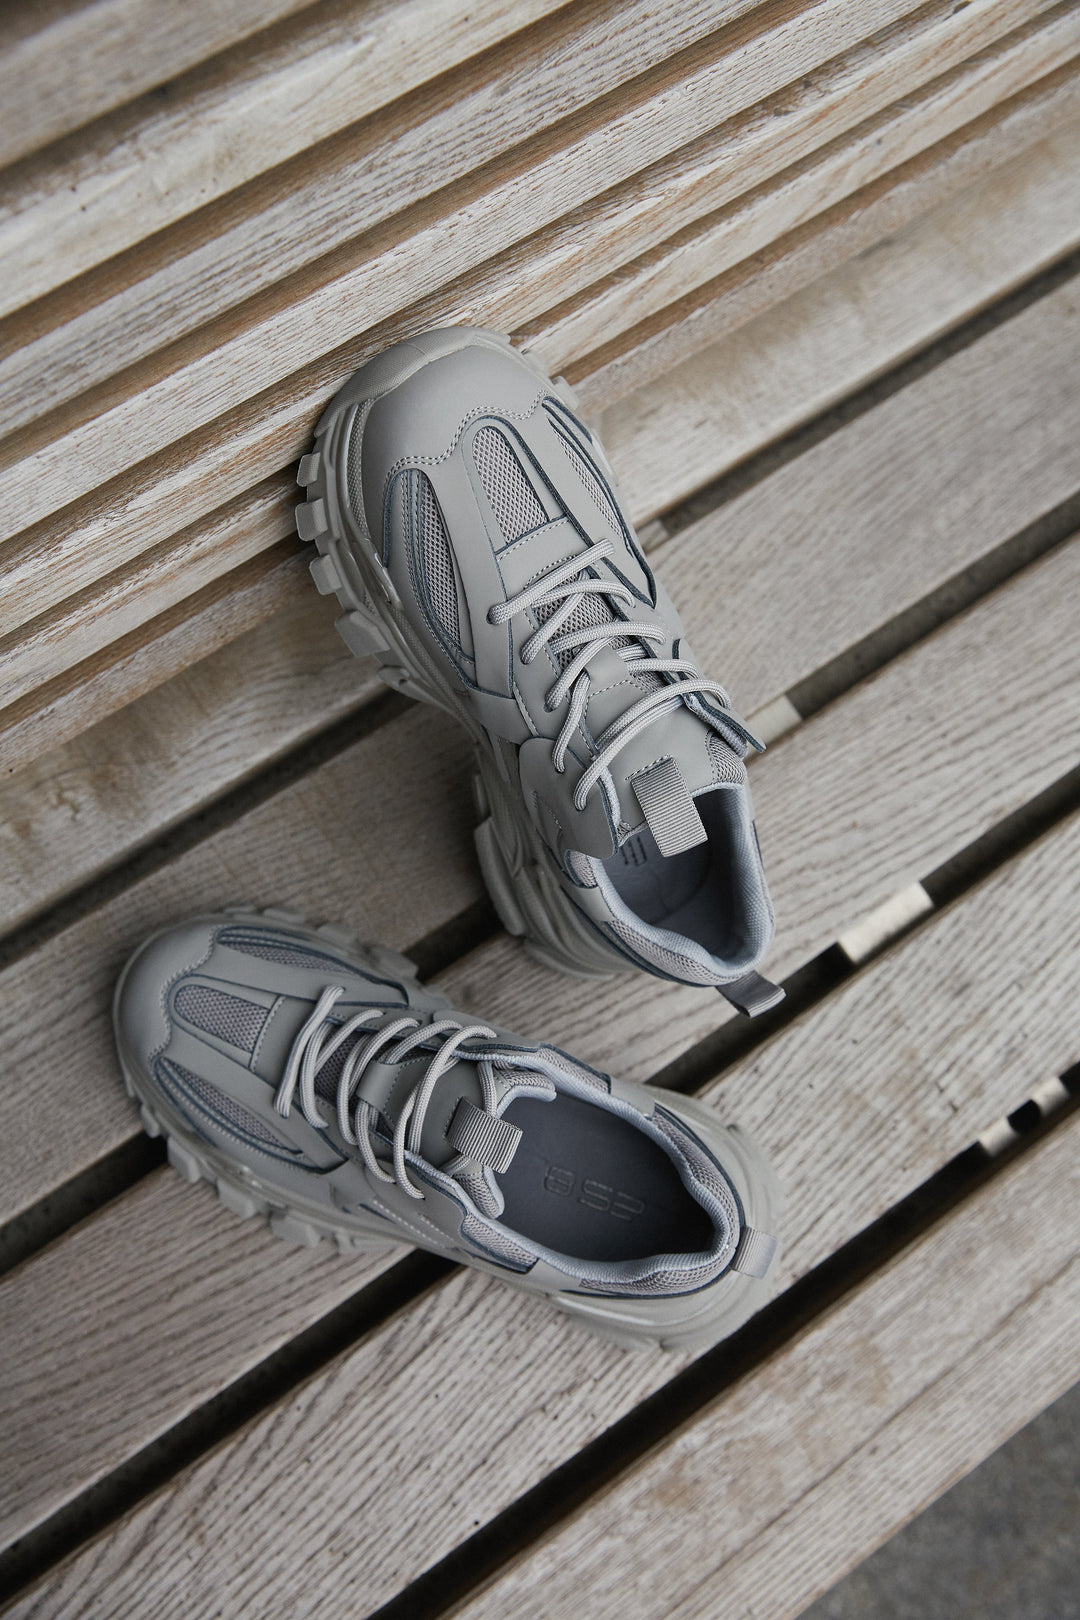 Women's grey sneakers with a trick sole.